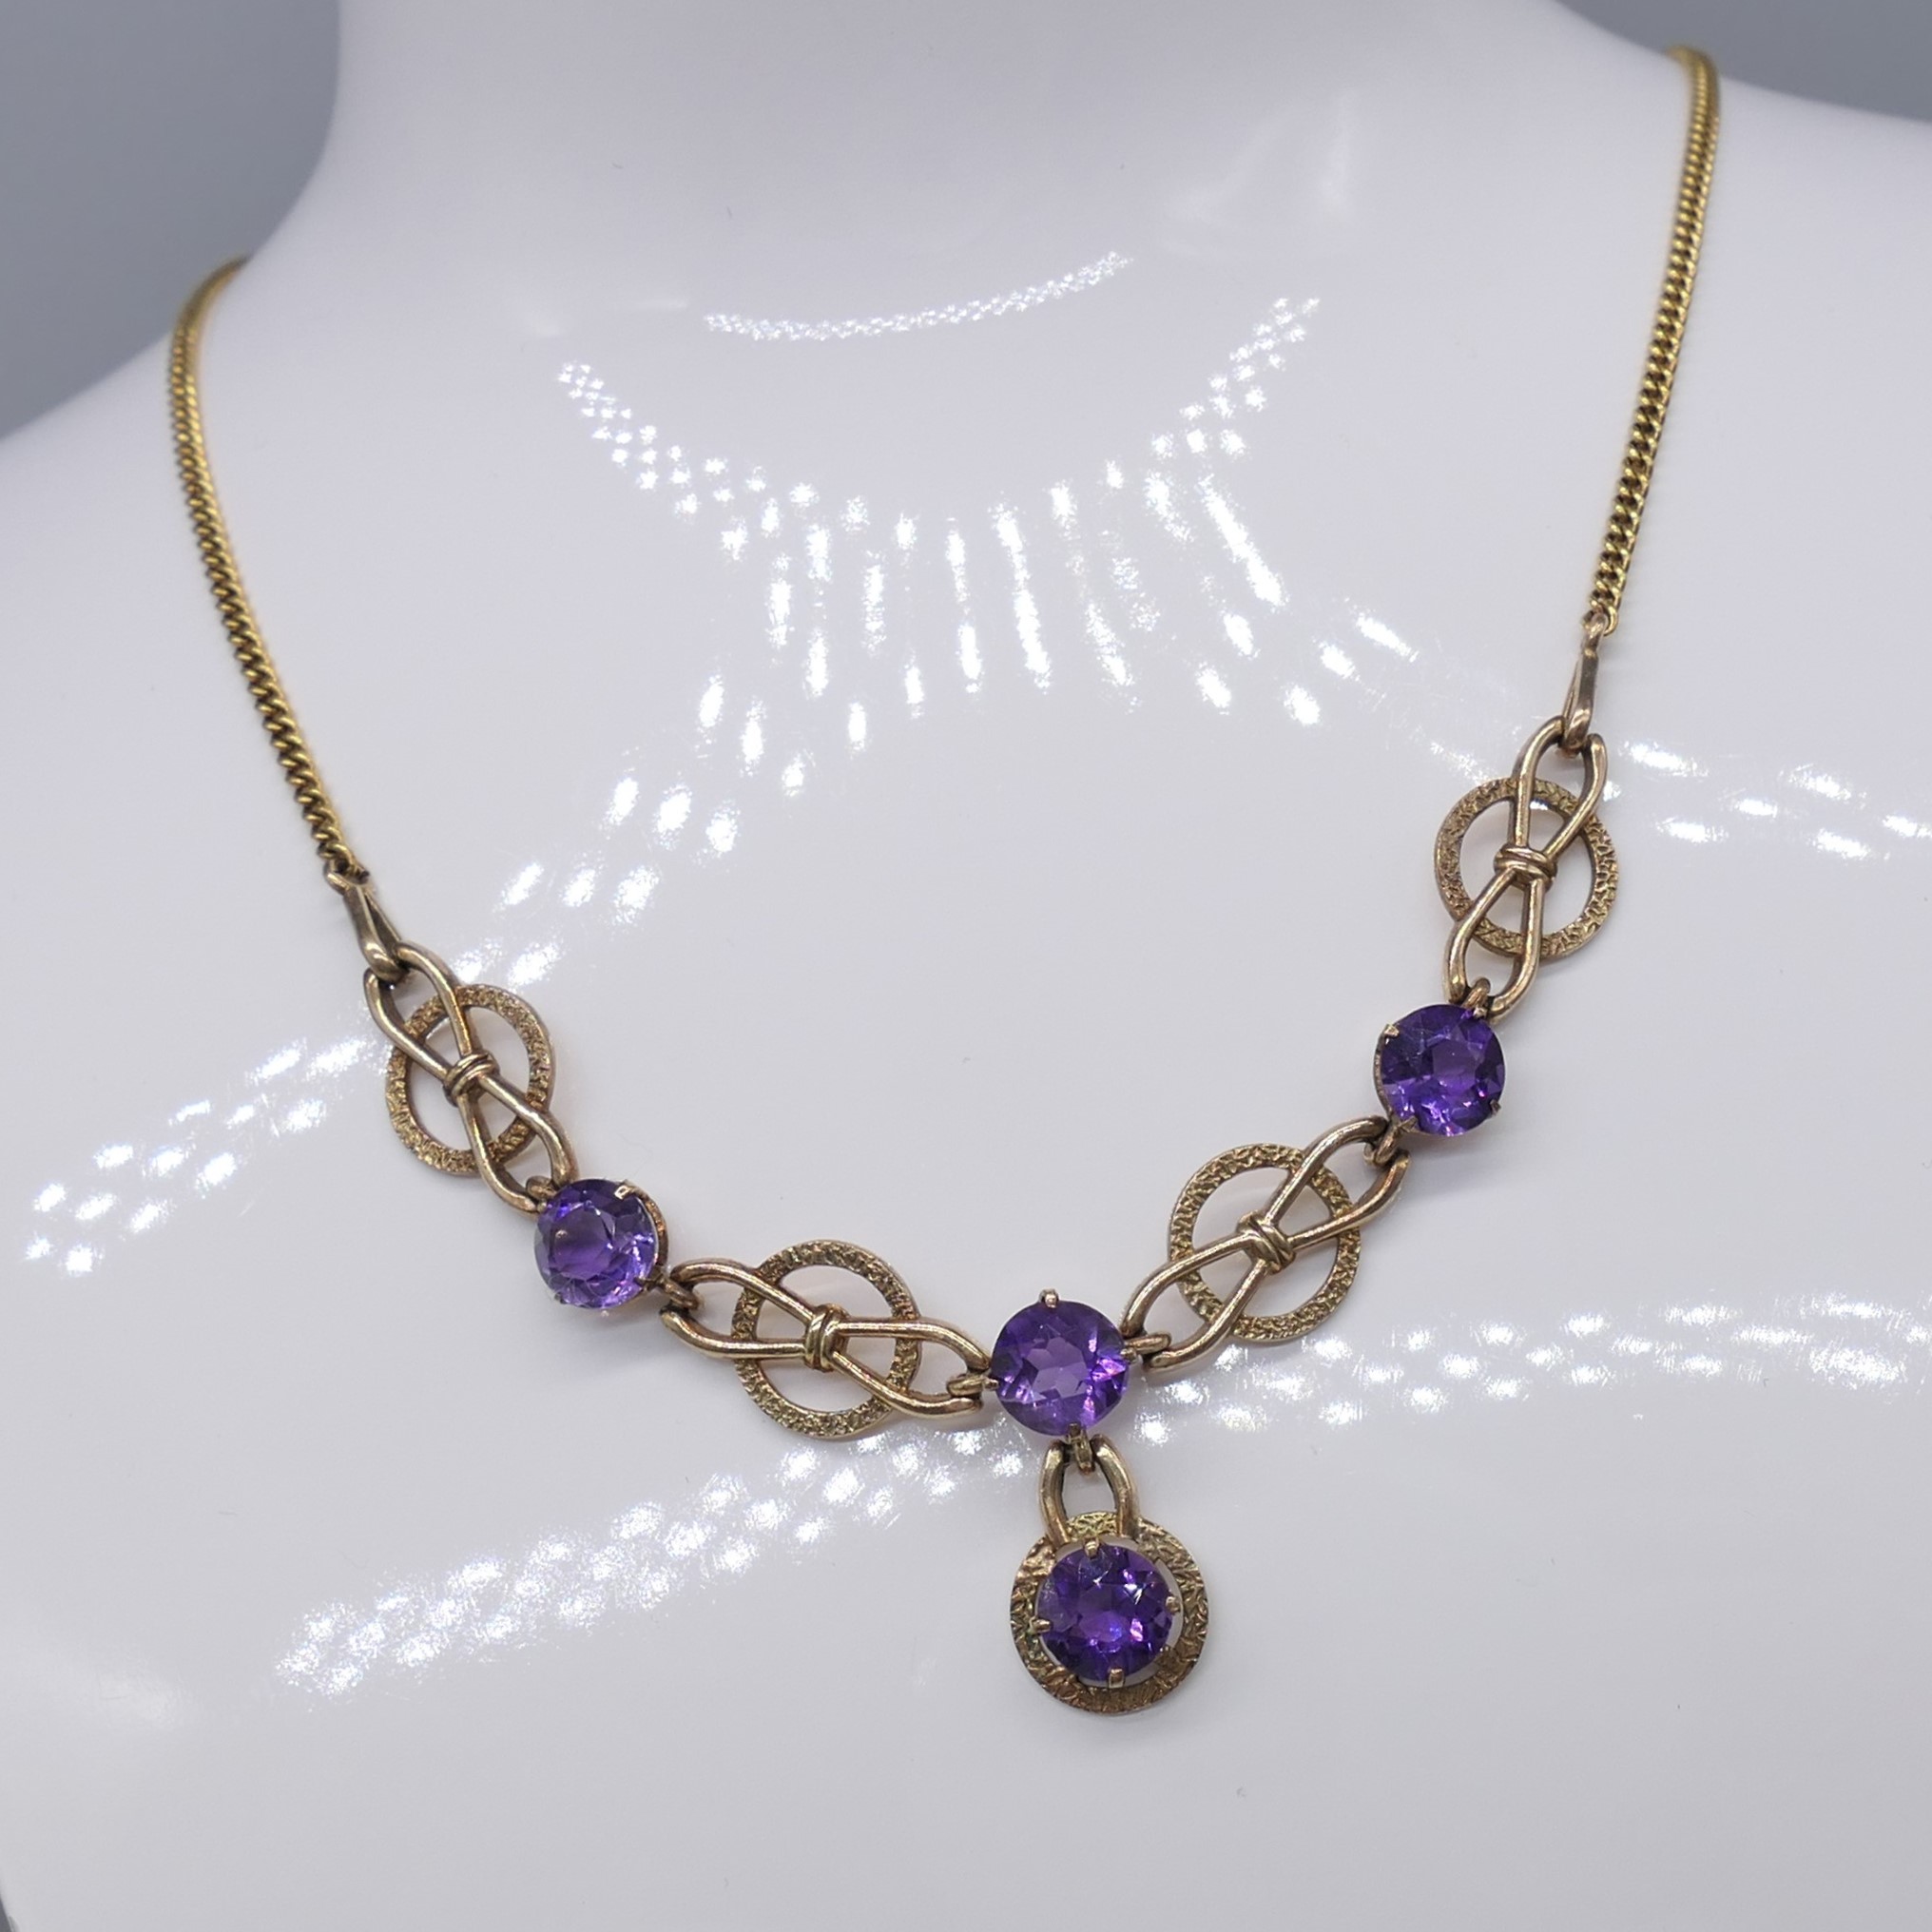 Ornate vintage 9ct yellow gold necklace set with round-cut purple amethysts - Image 6 of 9